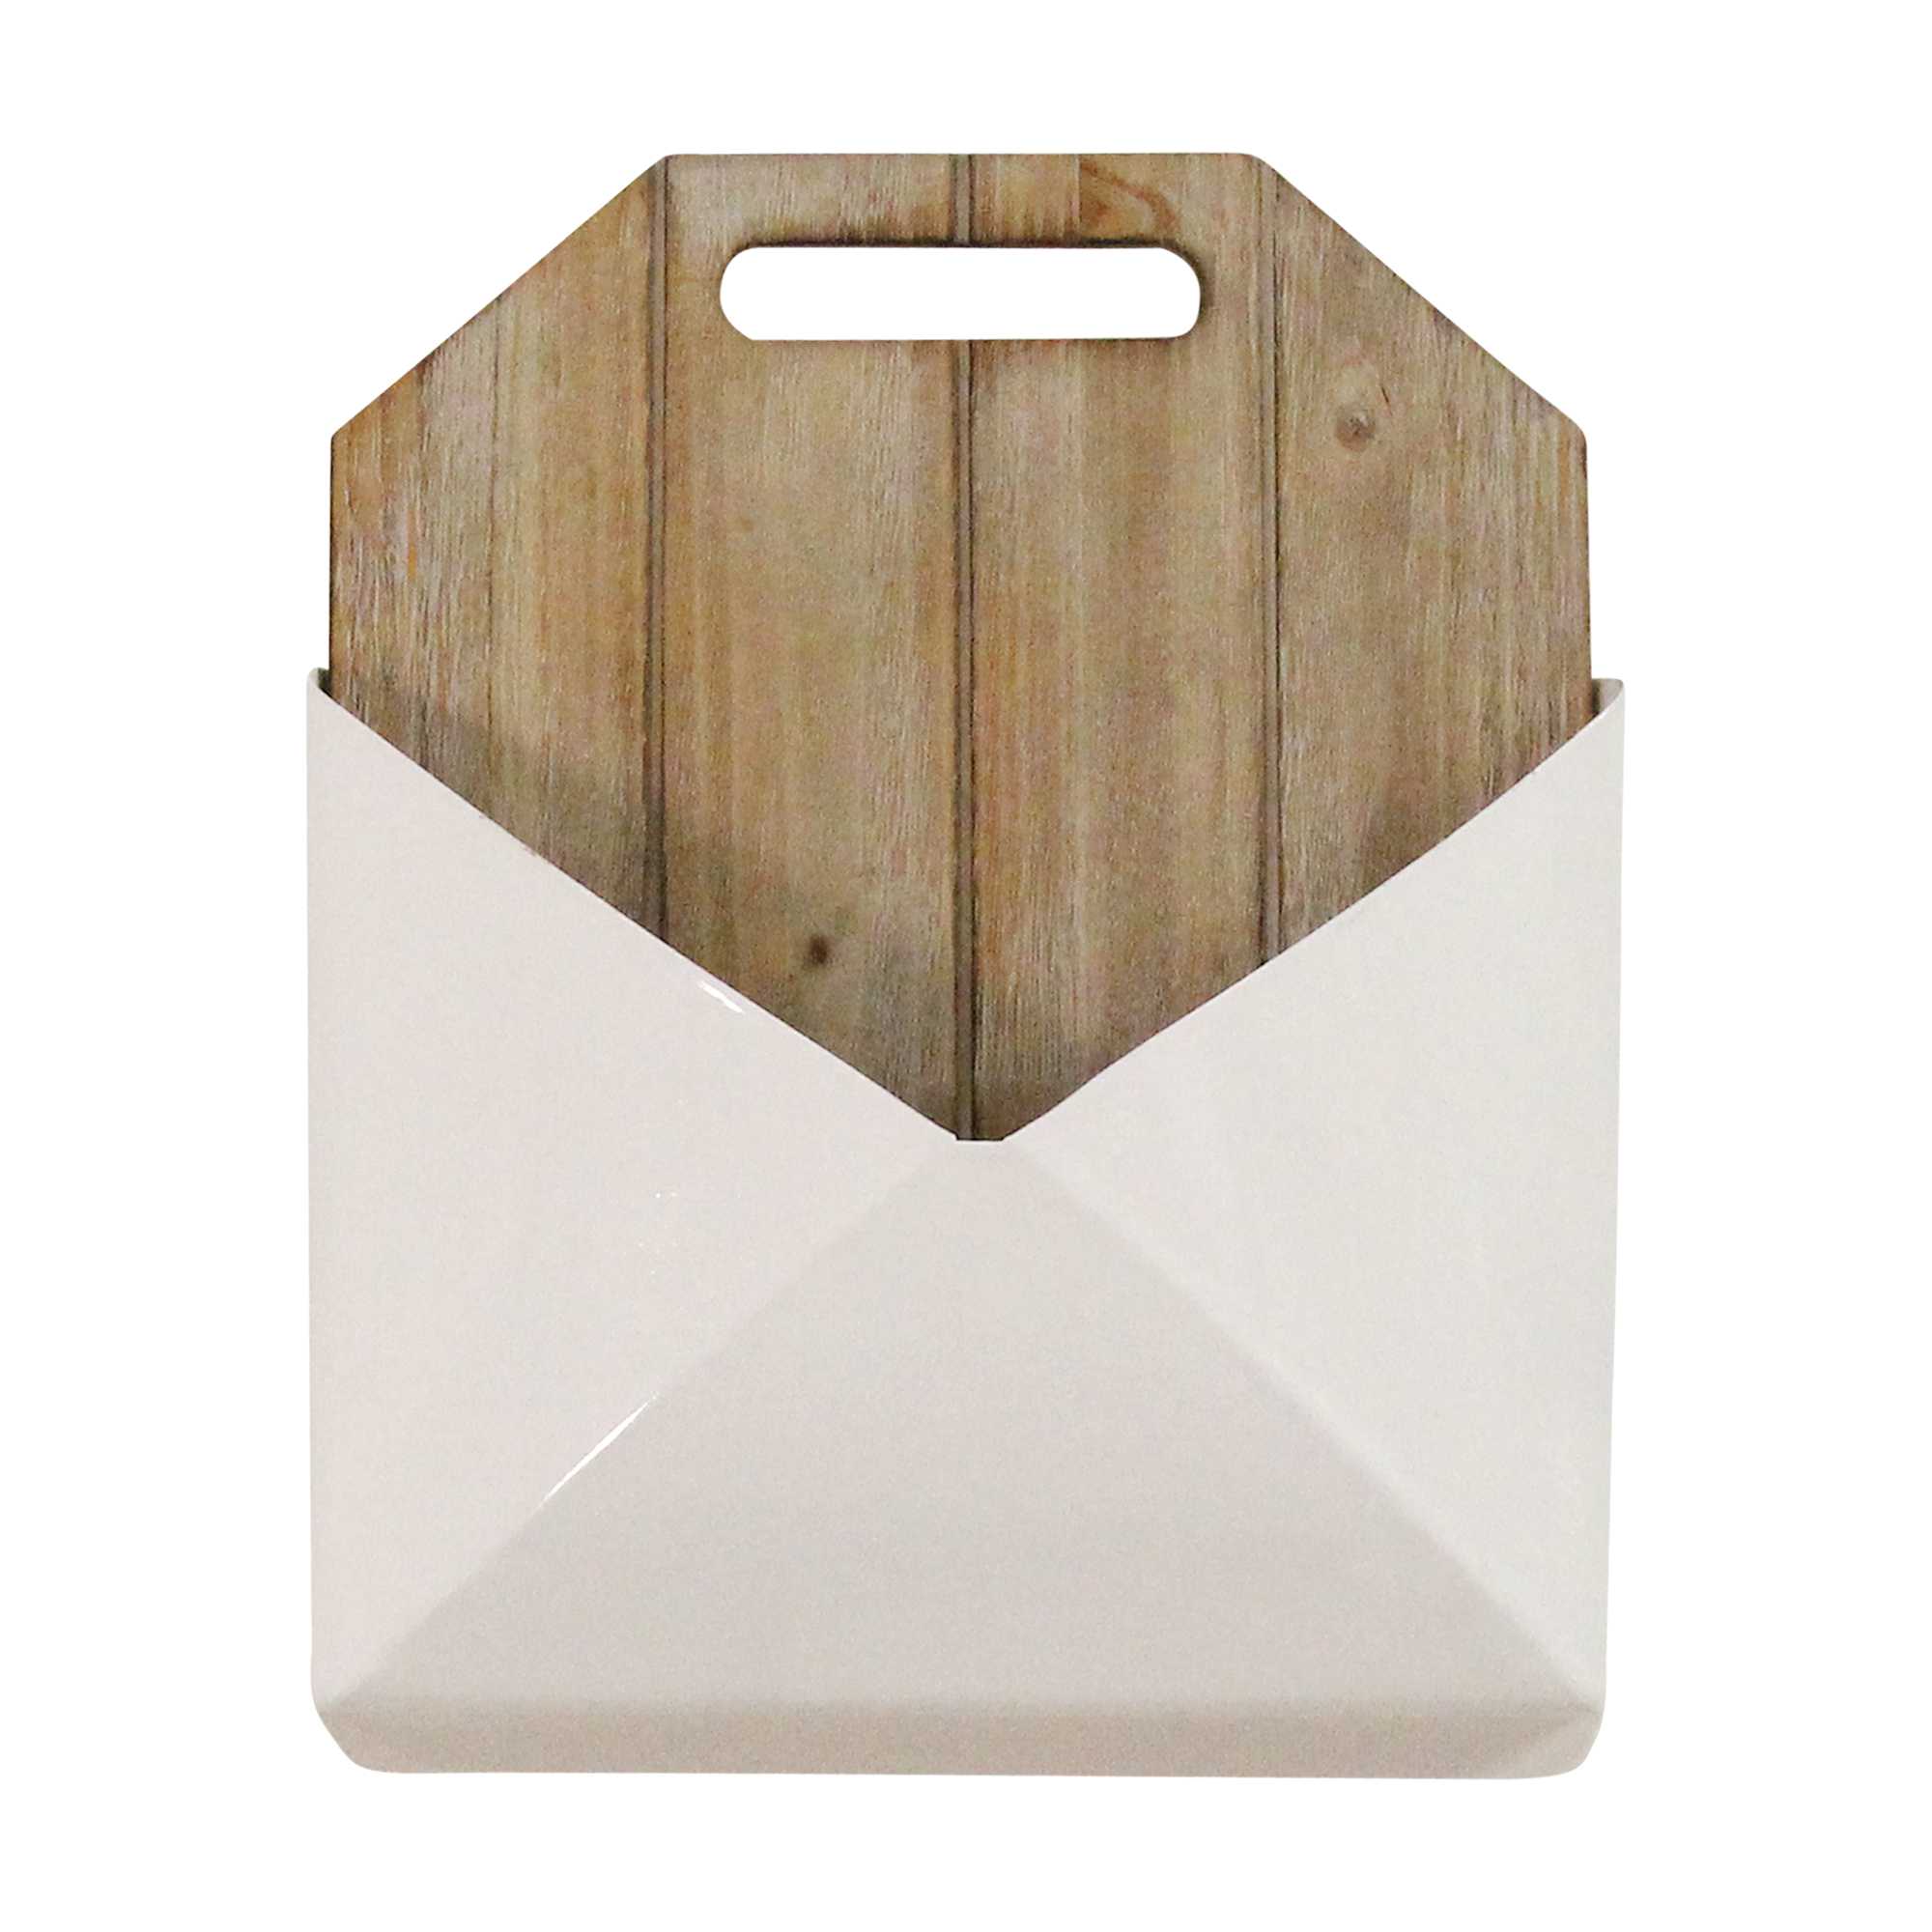 Wood and White Metal Wall Hanging Mailbox